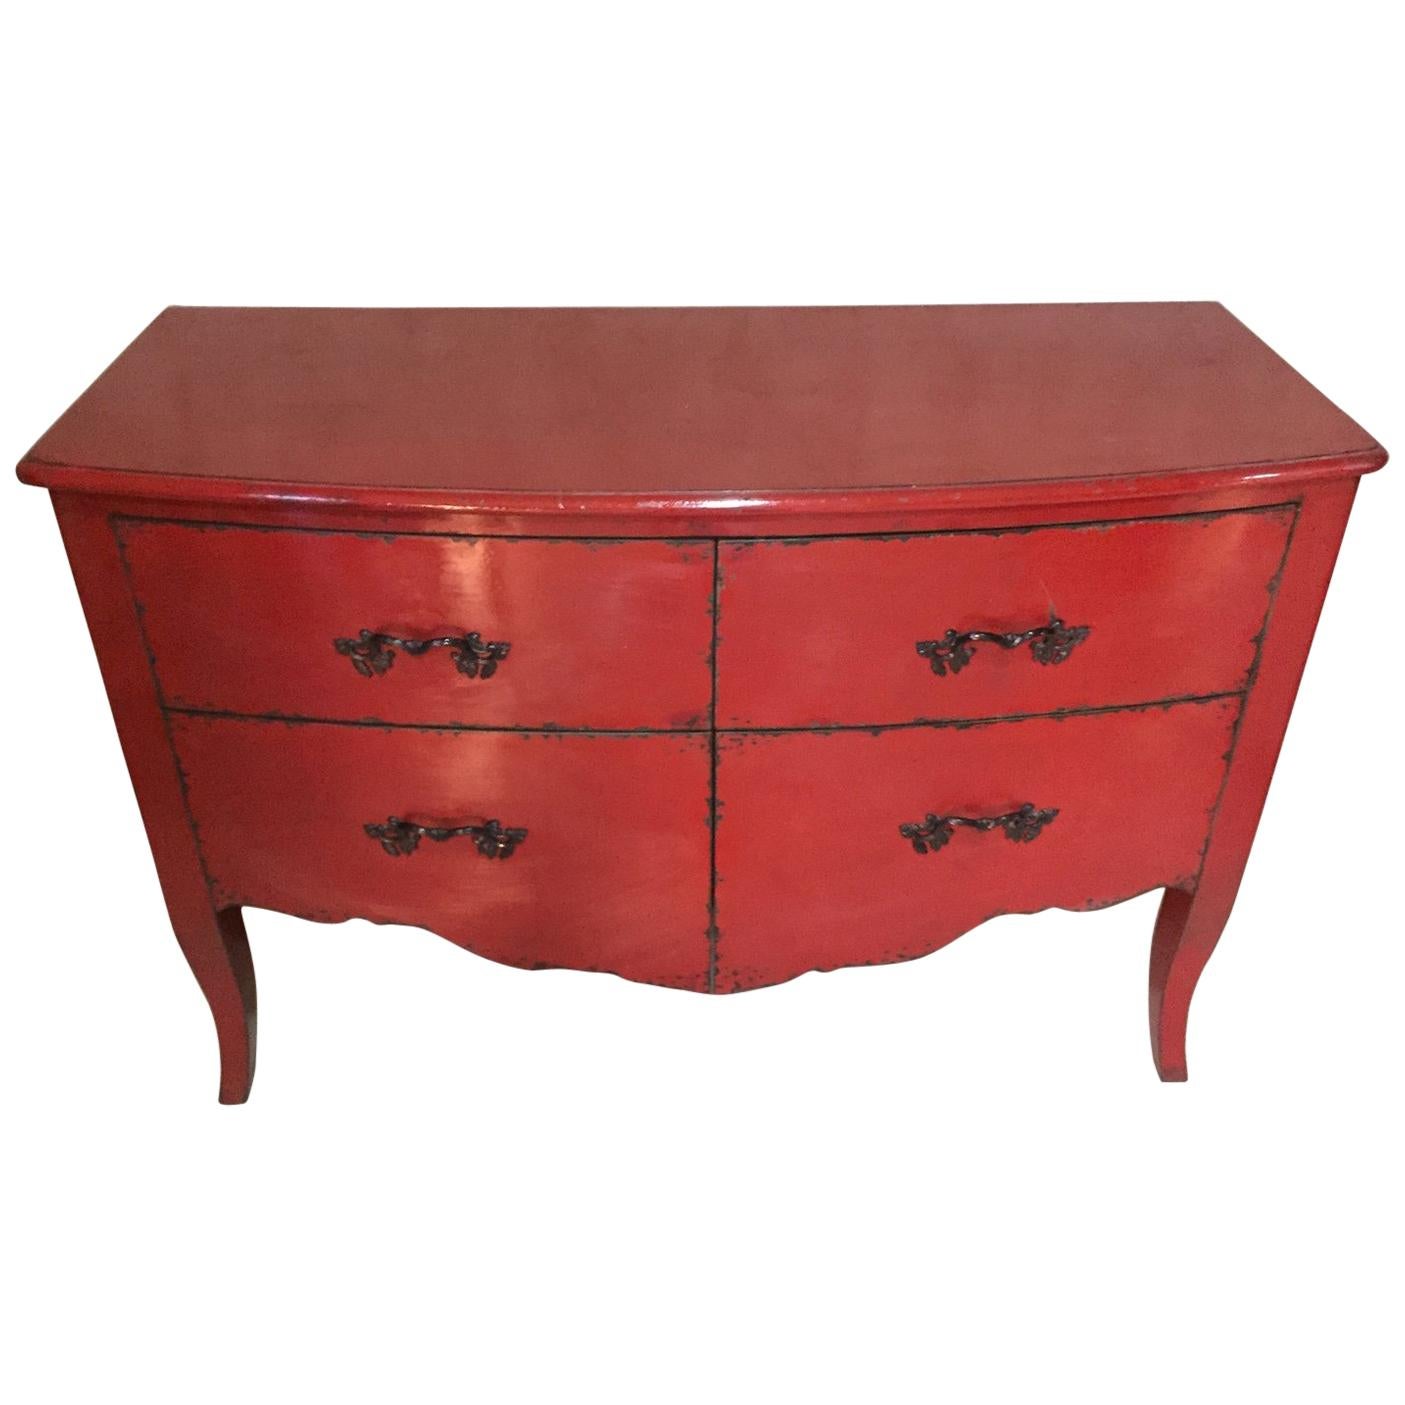 20th Century Regency Style Red Patinated Commode